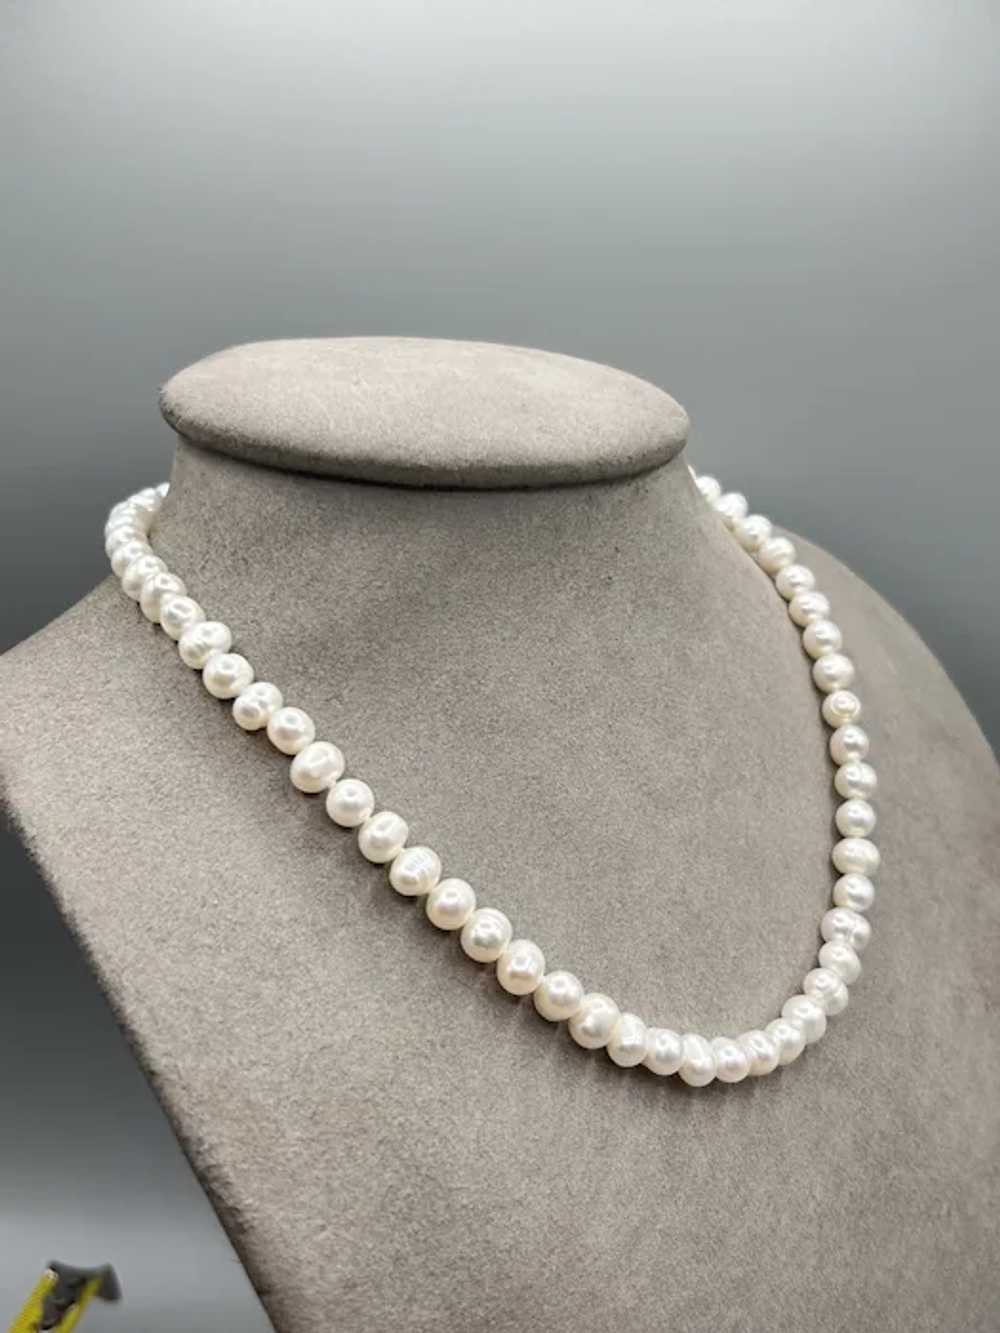 Beaded Genuine Pearls Necklace Hand Knotted Irreg… - image 4